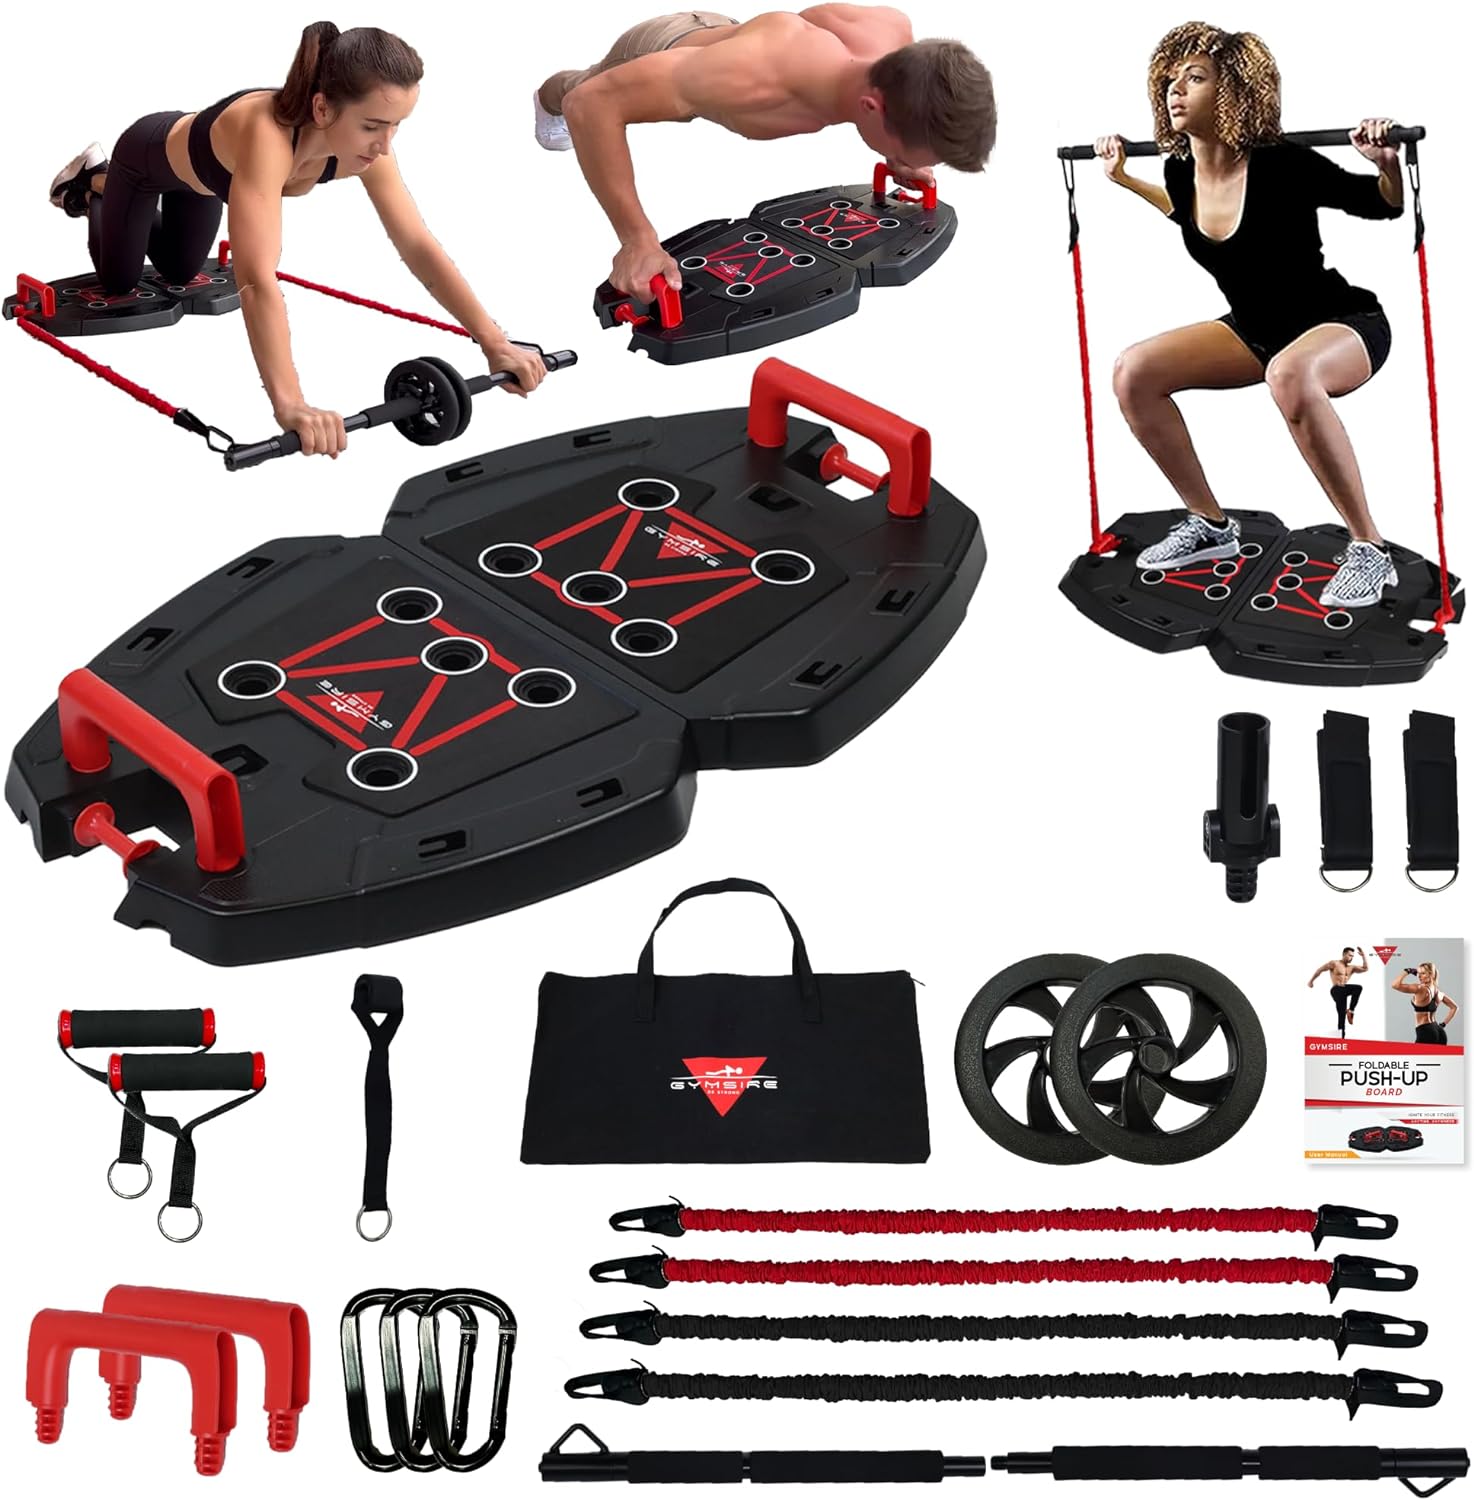 Gymsire Portable Home Gym Equipment Review